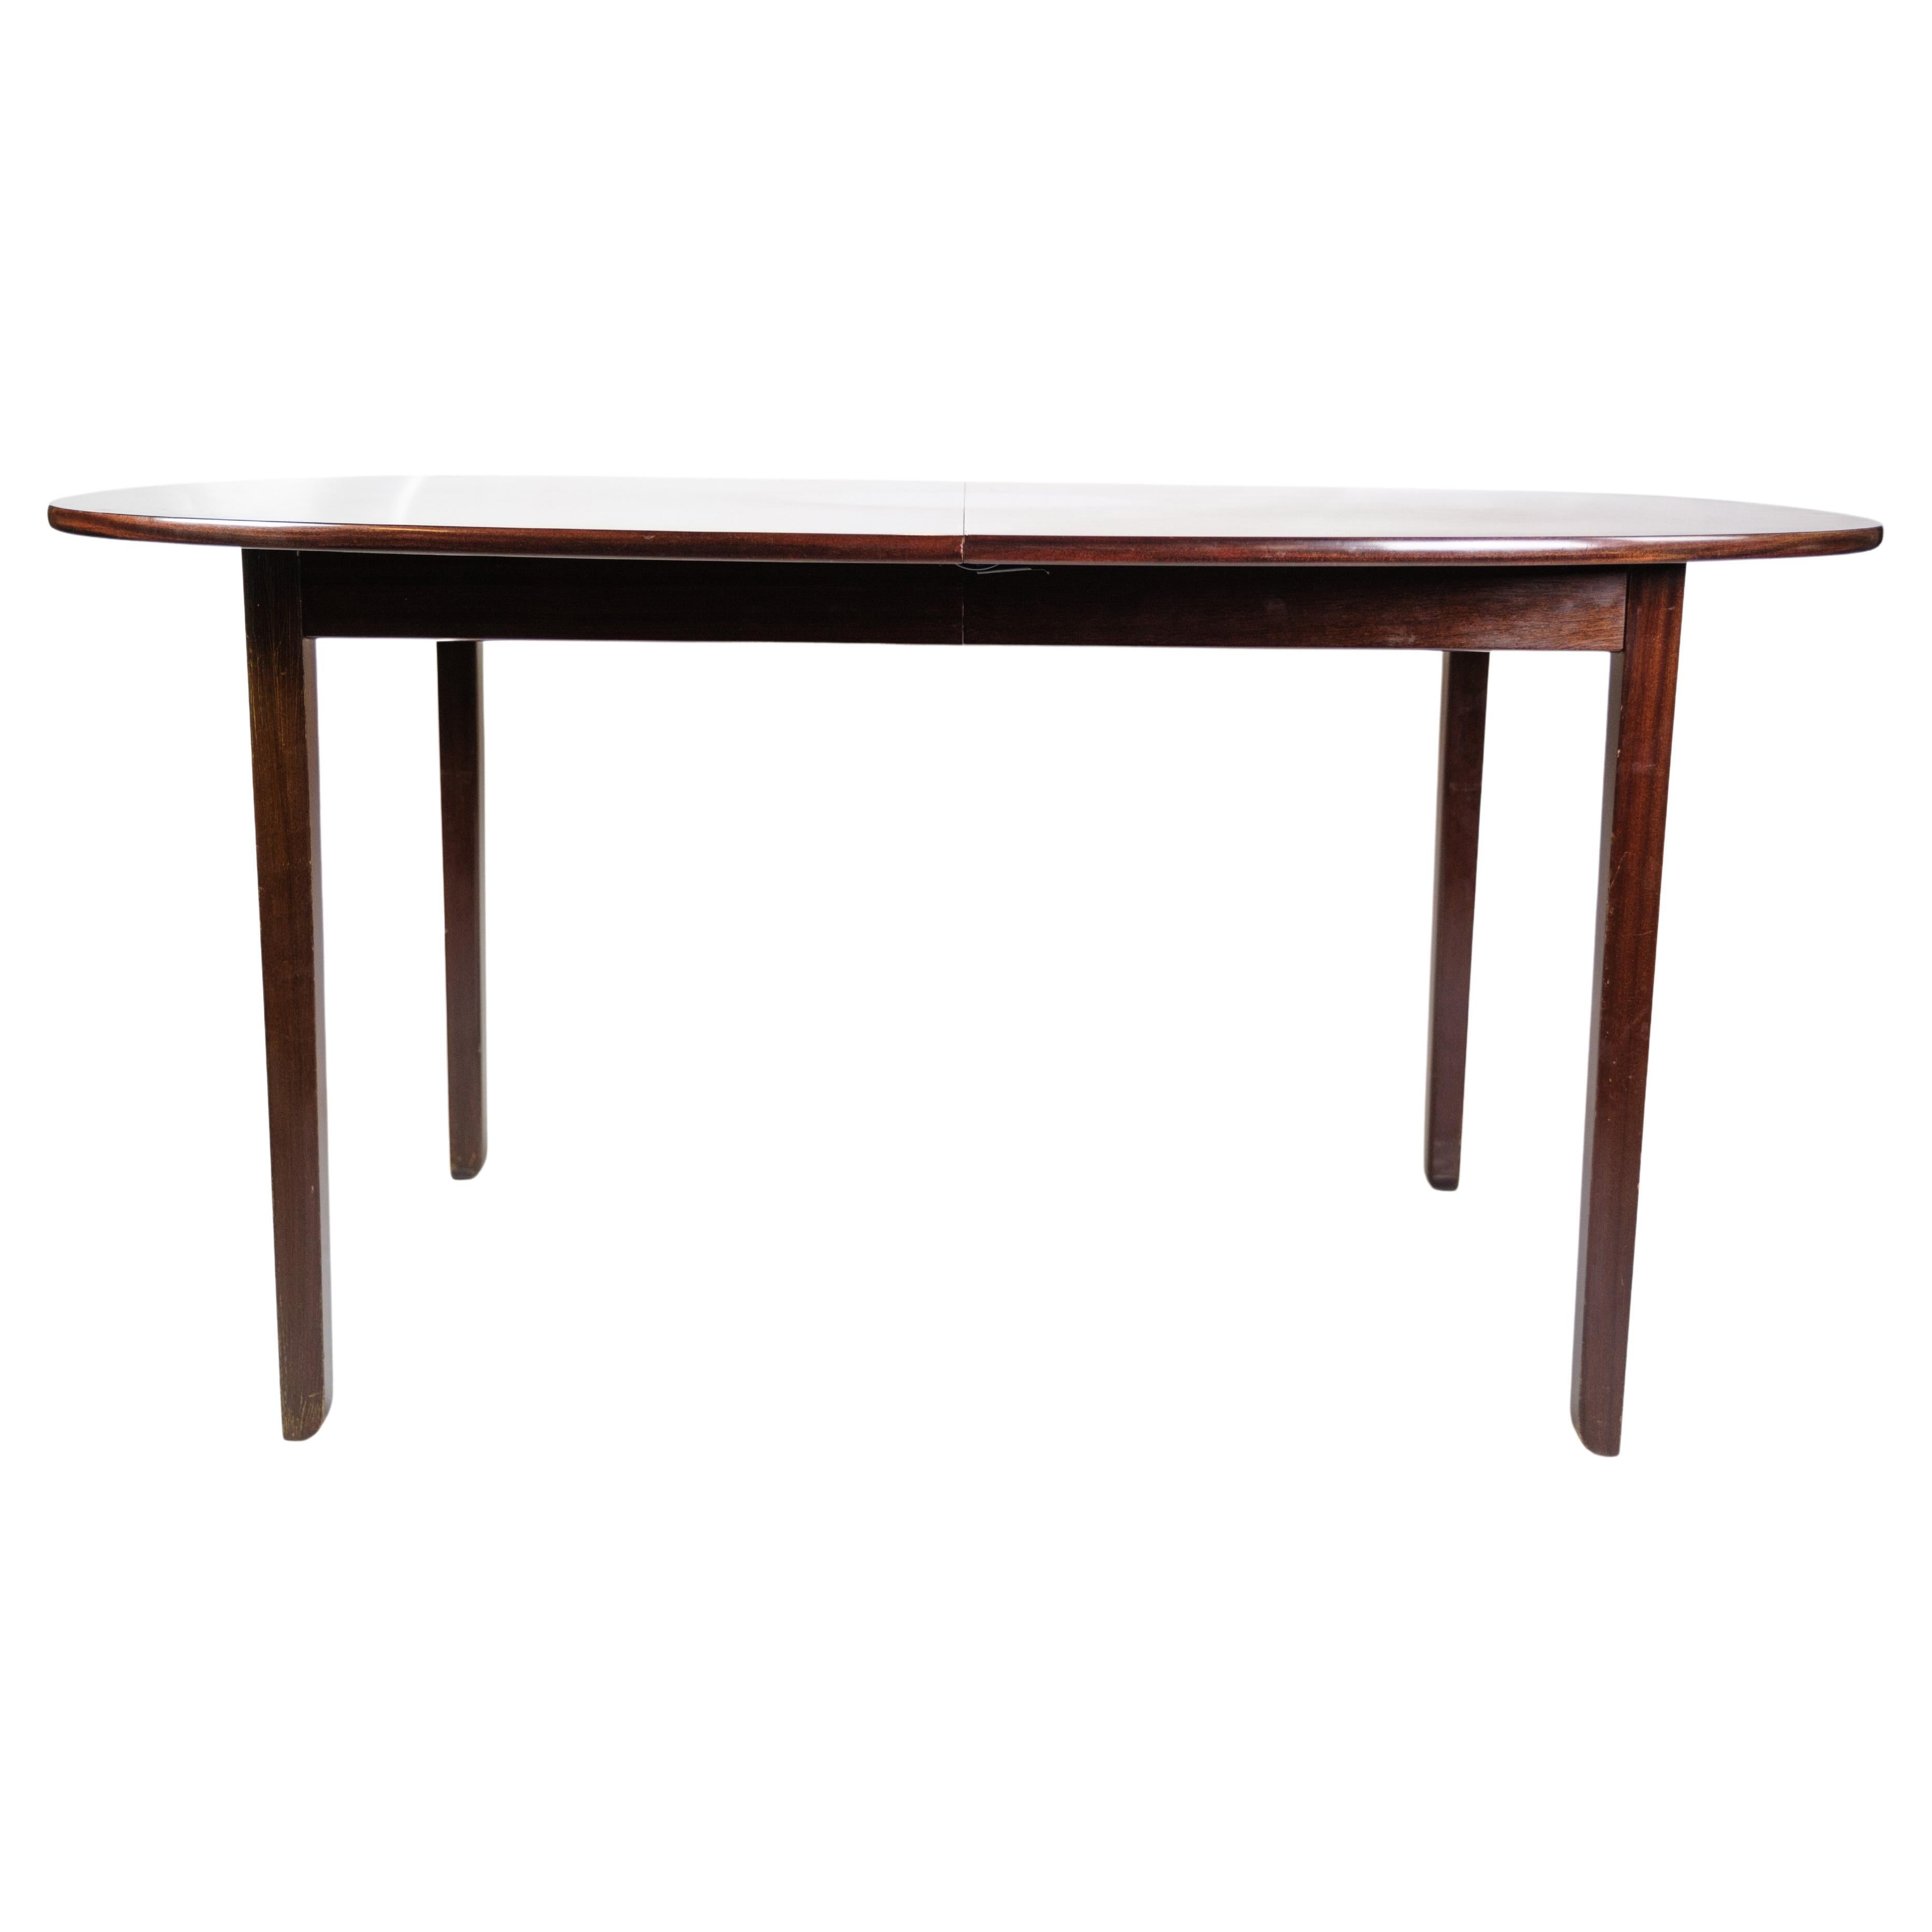 Dining Room Table Made In Mahogany By Ole Wanscher From 1960s